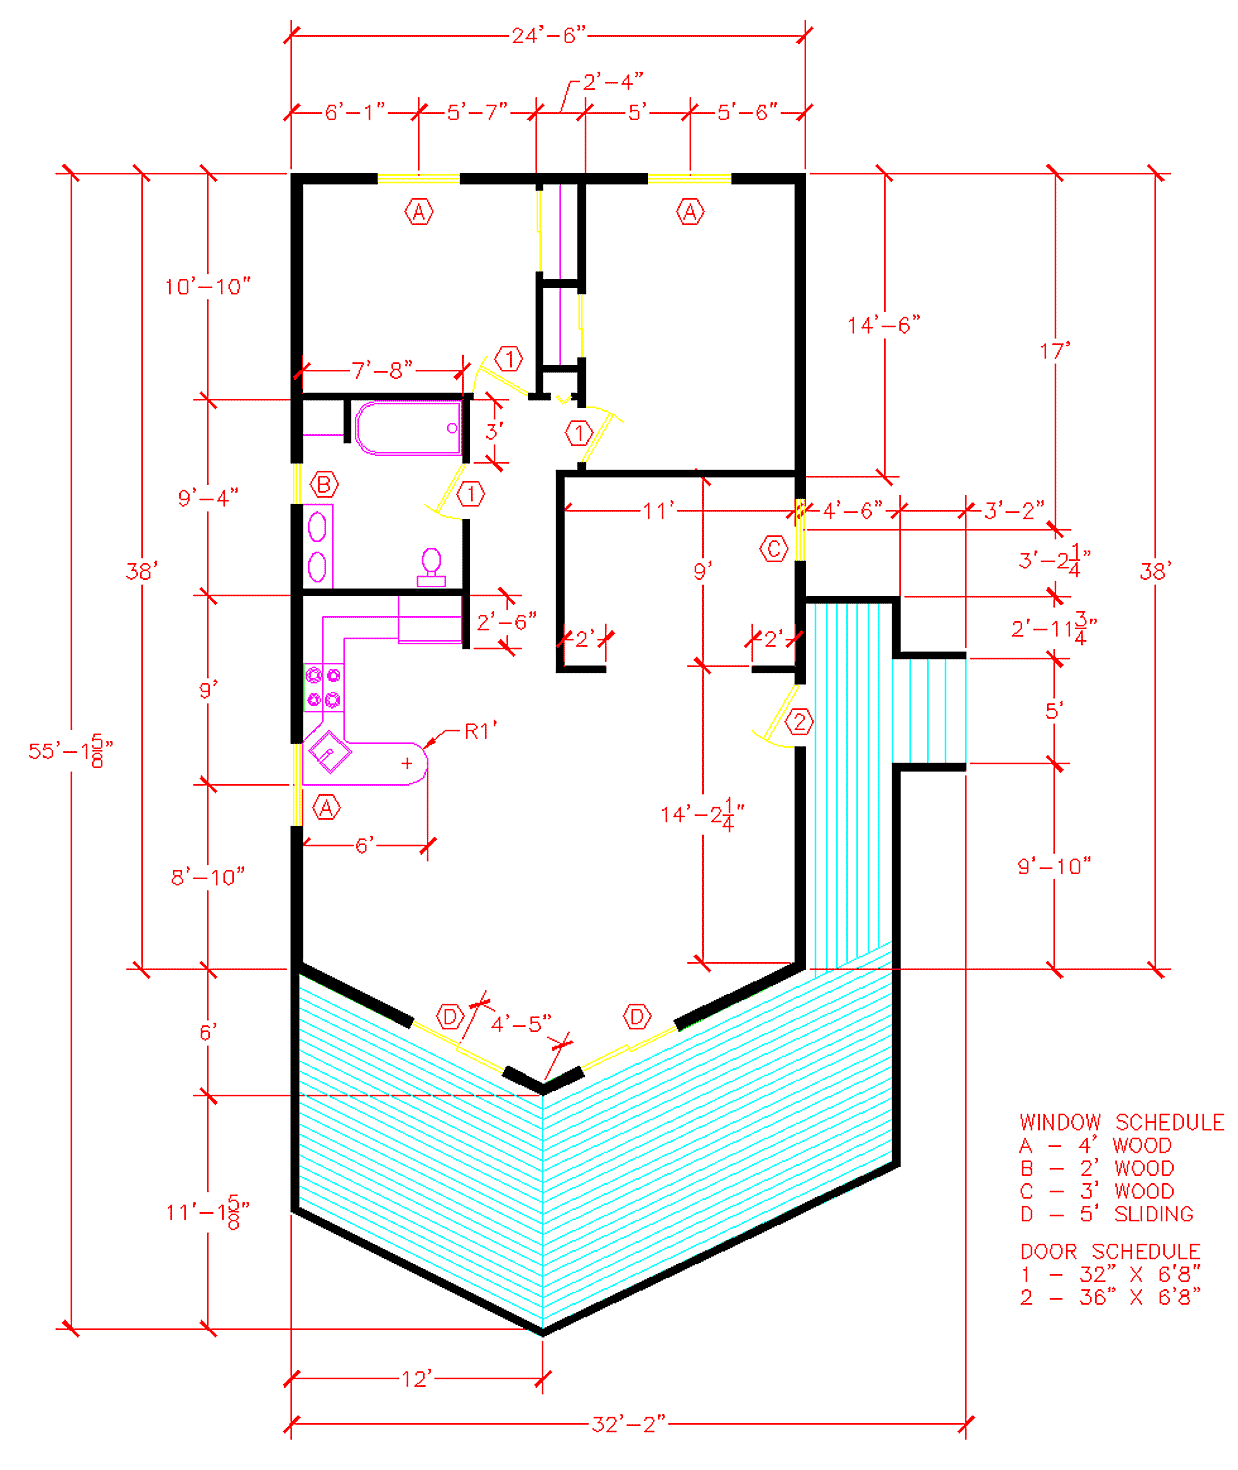 Drawing A Floor Plan Learn Accurate With Video